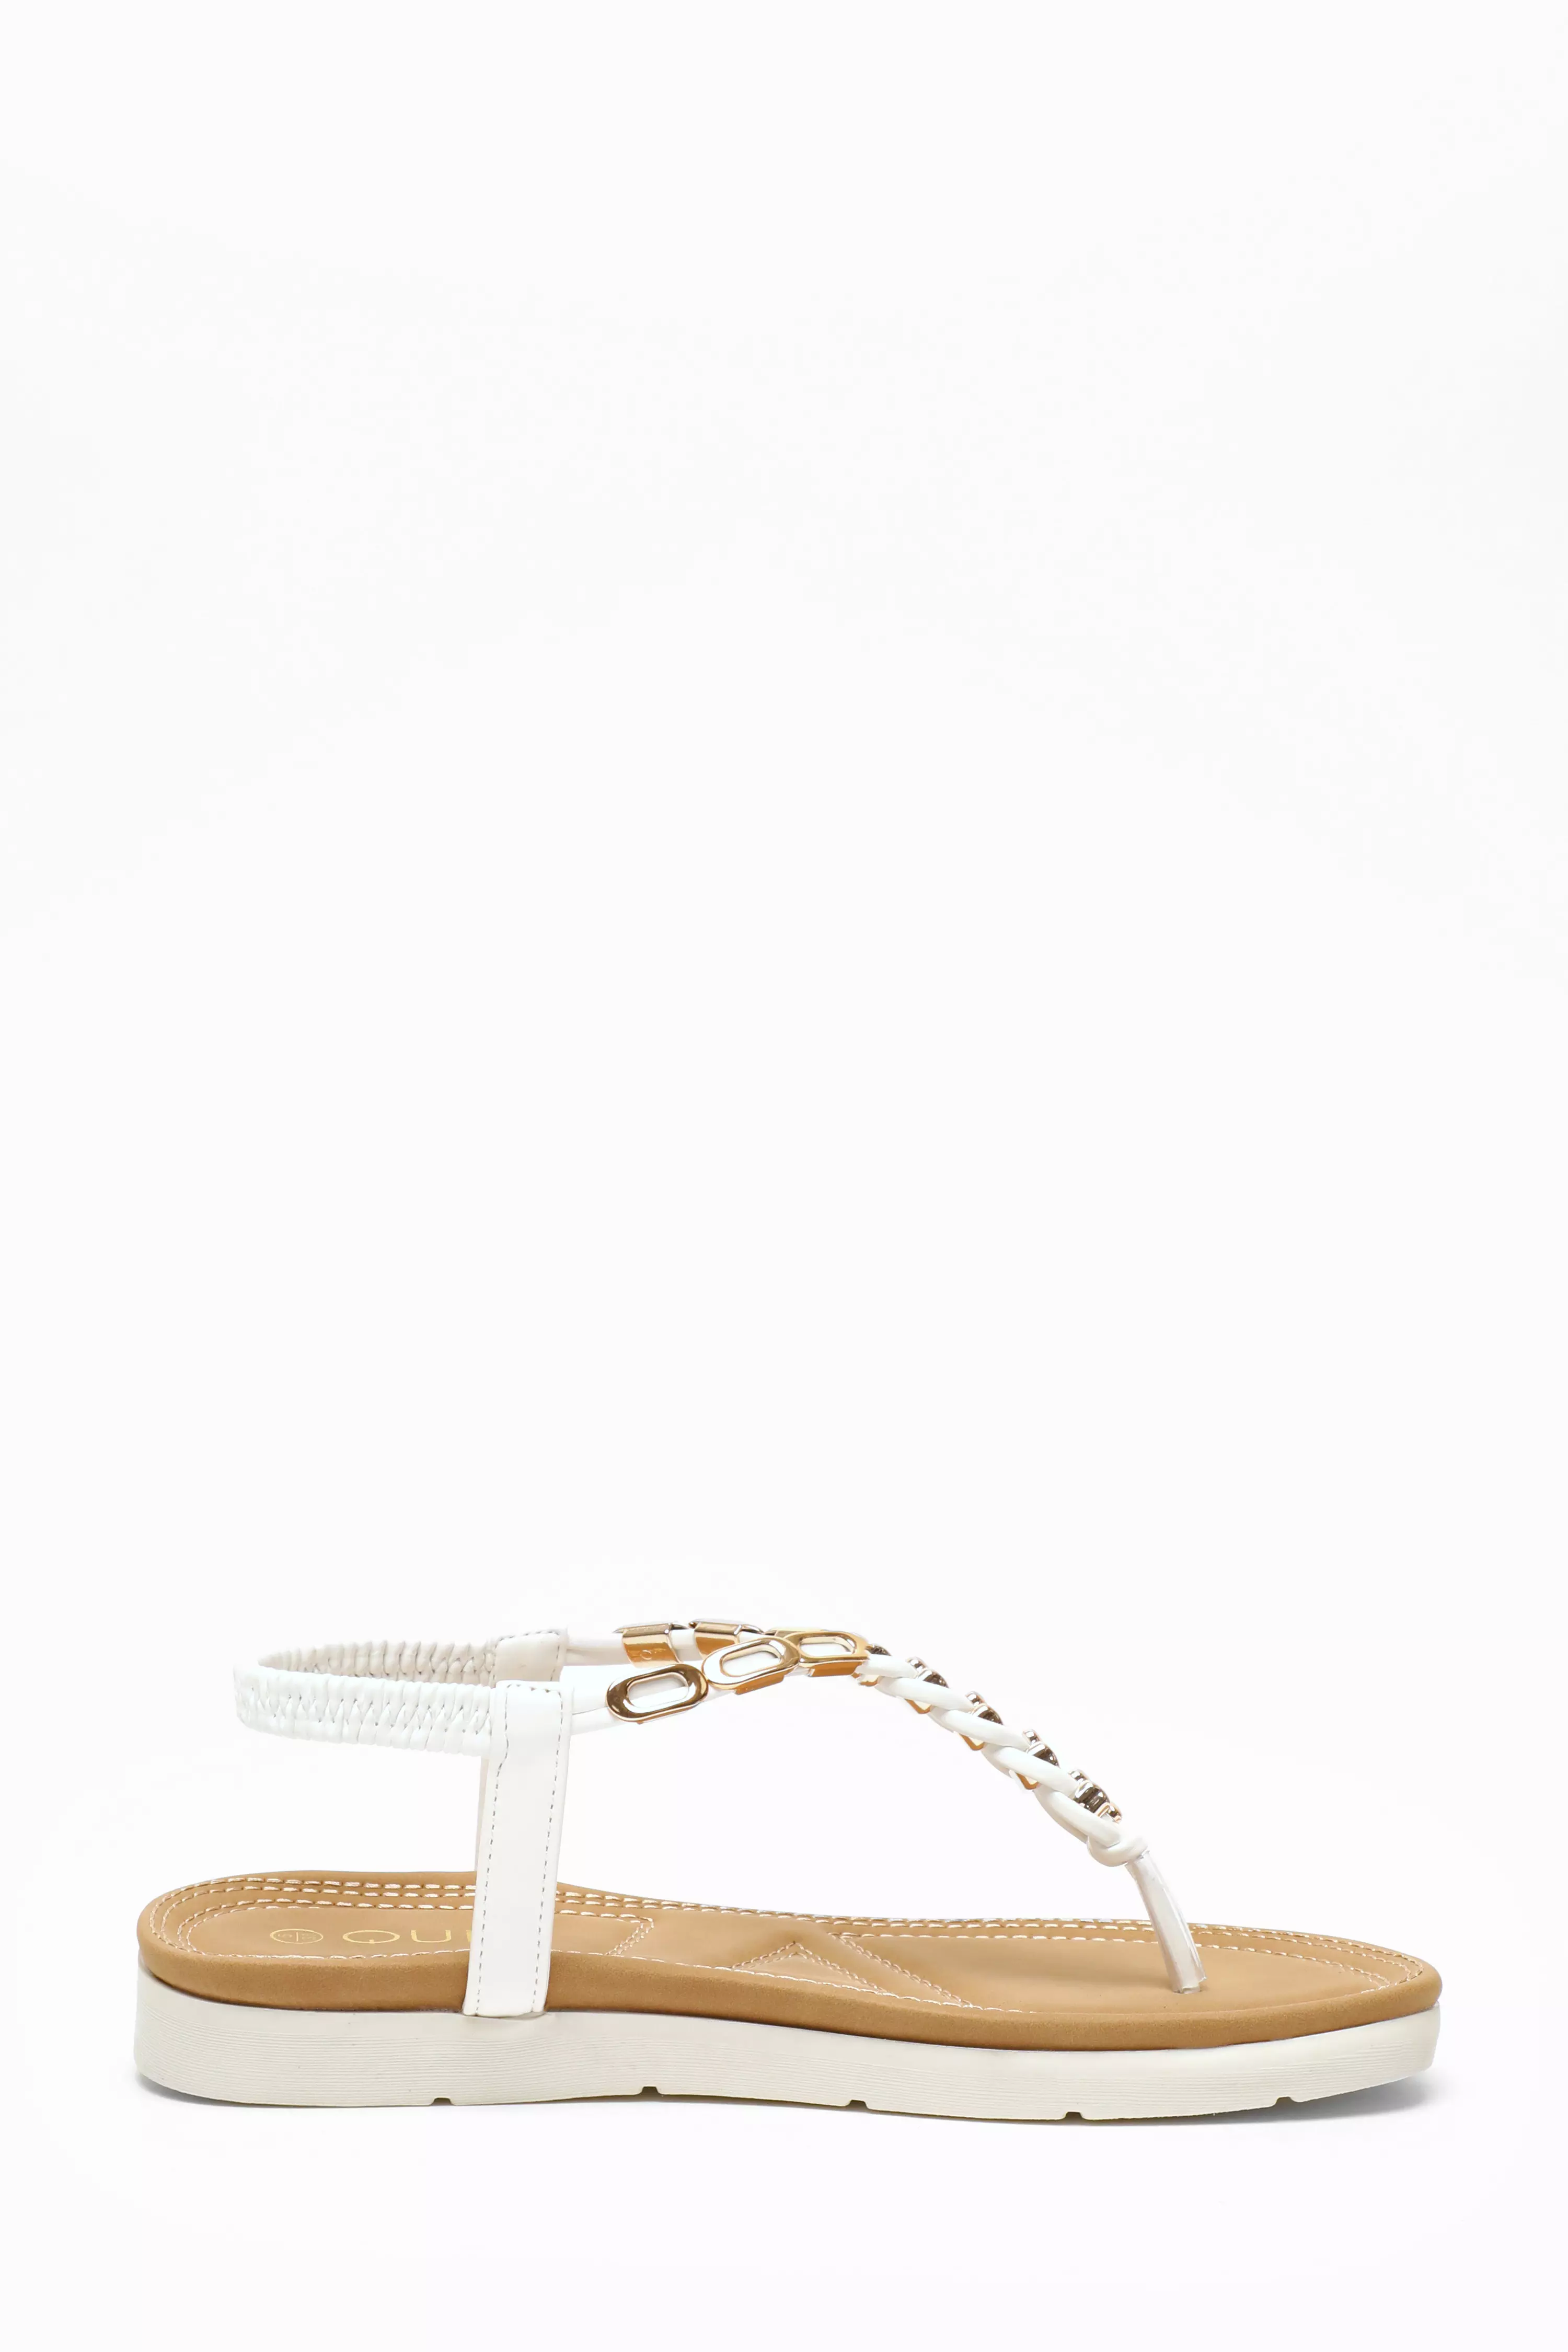 White Pleated Comfort Flat Sandals